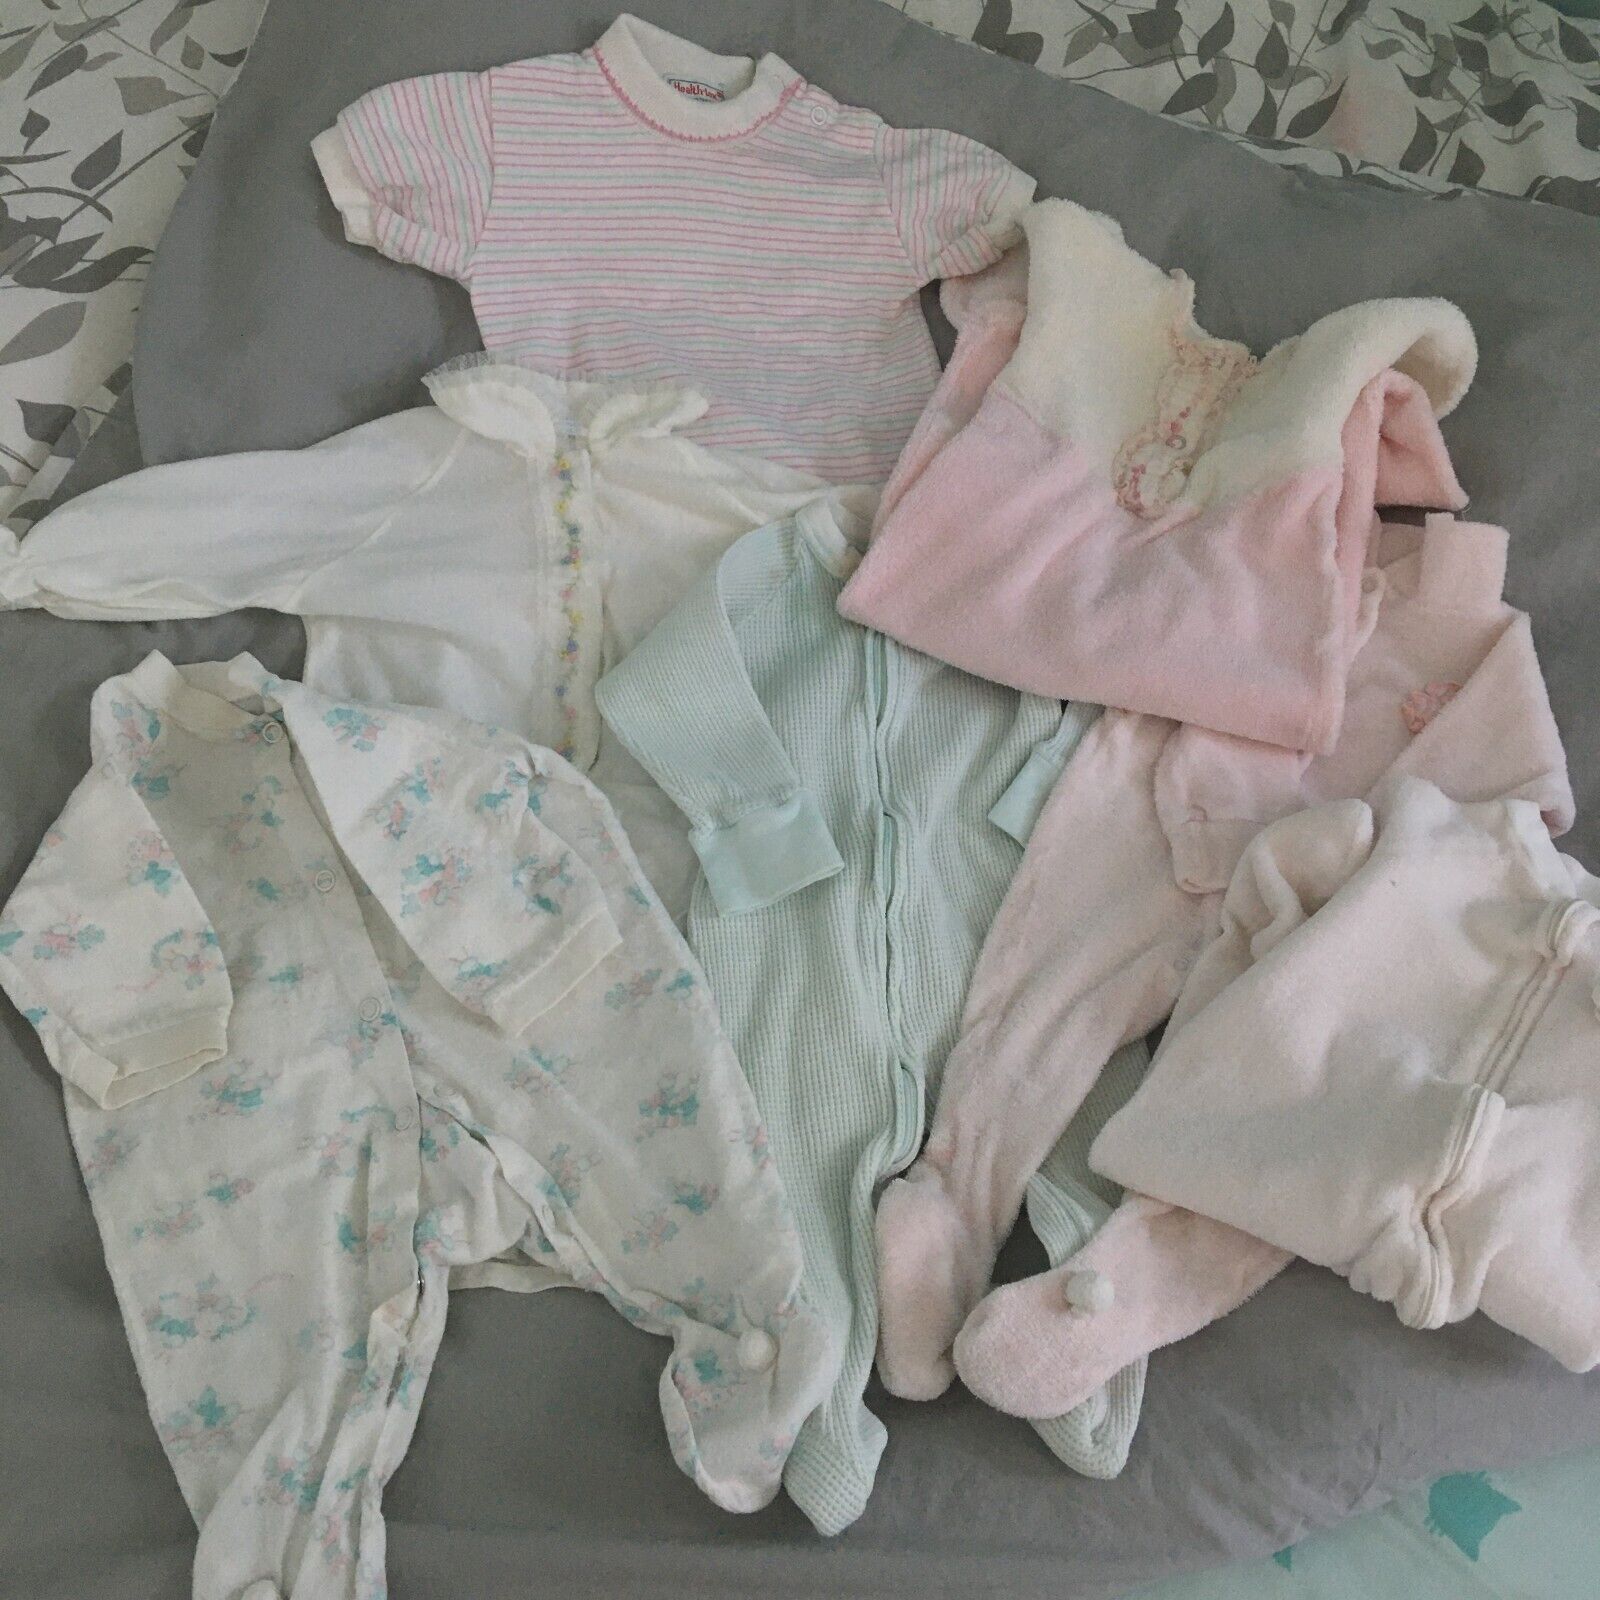 1960's Vintage Baby Clothes - Lot Of 7 - Gown, Sleeper, Shirt-carters, Healthtex